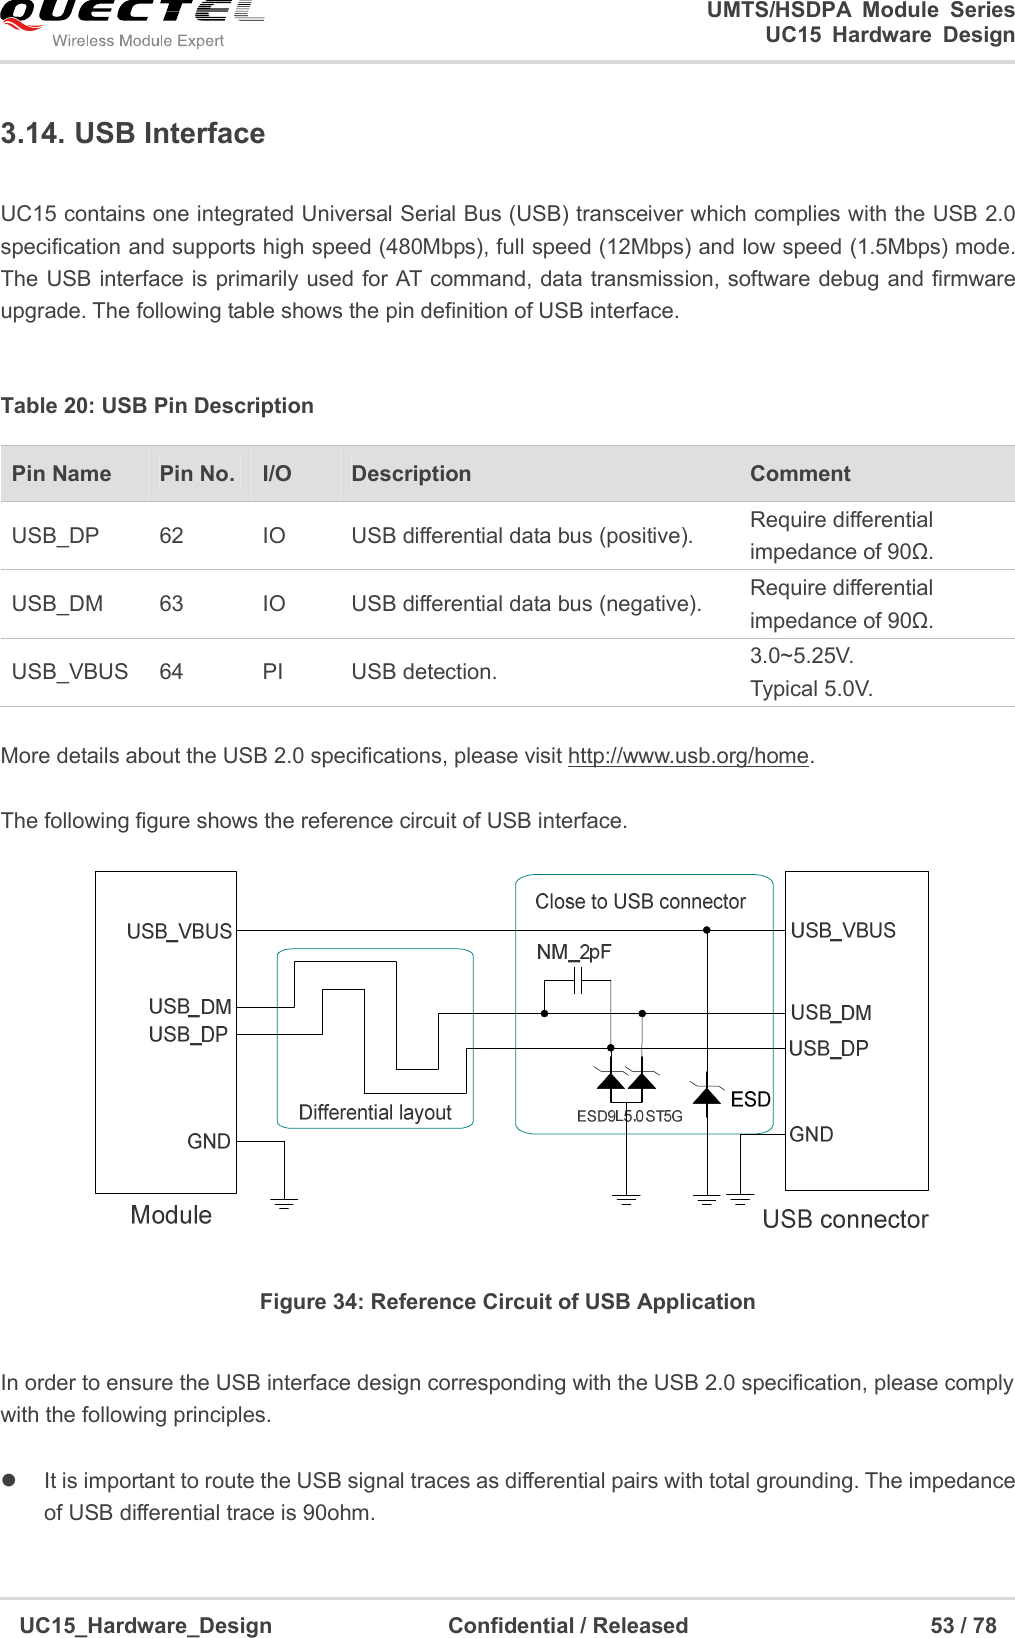                                                                        UMTS/HSDPA  Module  Series                                                                 UC15 Hardware Design  UC15_Hardware_Design                                Confidential / Released                                            53 / 78    3.14. USB Interface  UC15 contains one integrated Universal Serial Bus (USB) transceiver which complies with the USB 2.0 specification and supports high speed (480Mbps), full speed (12Mbps) and low speed (1.5Mbps) mode. The USB interface is primarily used for AT command, data transmission, software debug and firmware upgrade. The following table shows the pin definition of USB interface.    Table 20: USB Pin Description  More details about the USB 2.0 specifications, please visit http://www.usb.org/home.  The following figure shows the reference circuit of USB interface.  Figure 34: Reference Circuit of USB Application  In order to ensure the USB interface design corresponding with the USB 2.0 specification, please comply with the following principles.    It is important to route the USB signal traces as differential pairs with total grounding. The impedance of USB differential trace is 90ohm. Pin Name    Pin No. I/O  Description    Comment USB_DP  62  IO  USB differential data bus (positive).  Require differential impedance of 90Ω. USB_DM  63  IO  USB differential data bus (negative).  Require differential impedance of 90Ω. USB_VBUS  64  PI  USB detection.  3.0~5.25V. Typical 5.0V. 